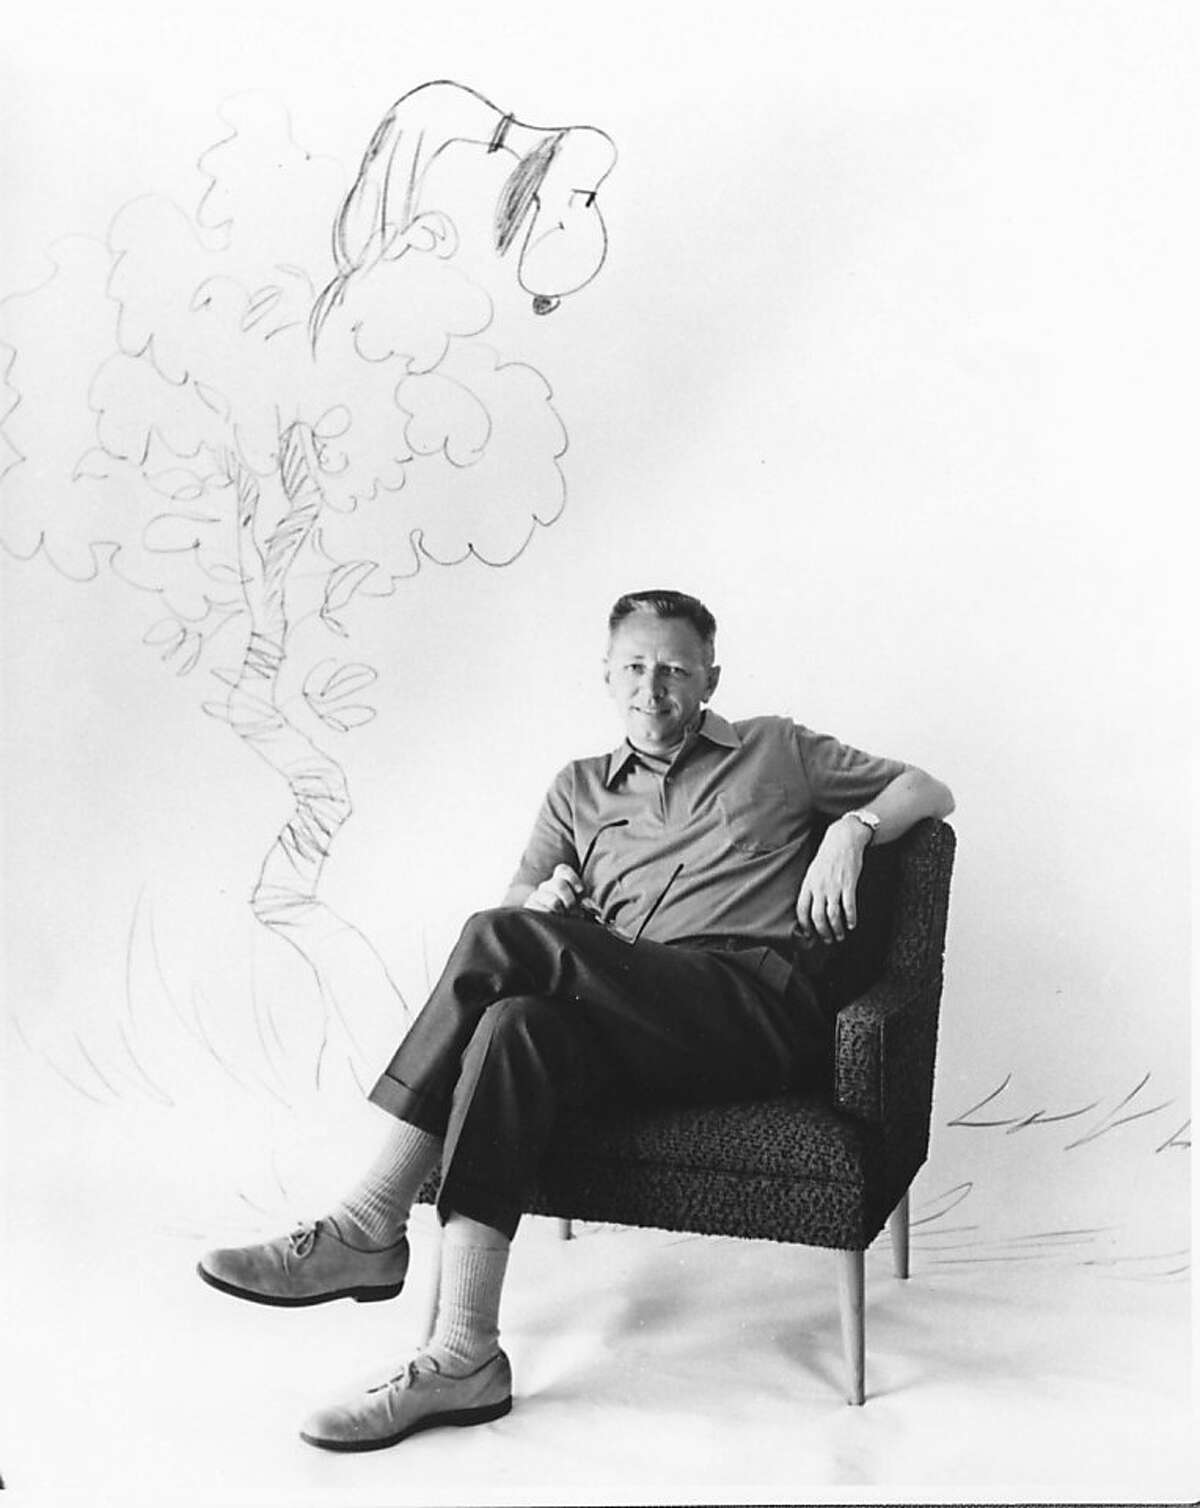 Charles Schulz sitting in a mid-century modern chair and Snoopy in the background as a vulture